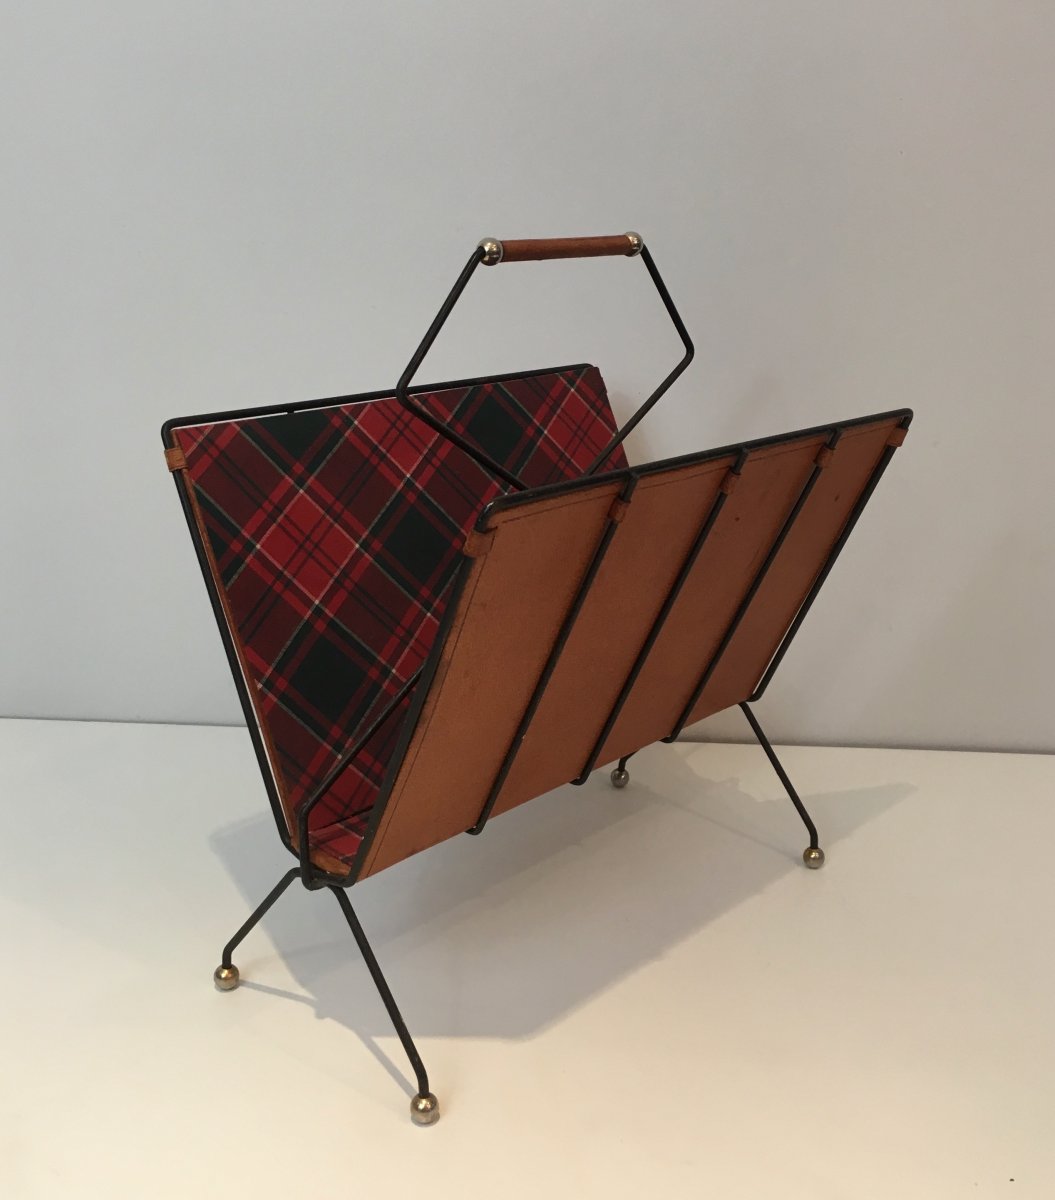 Magazine Rack In Black Lacquered Metal, Leather And Checkered Fabrics. French Work. Around 1950